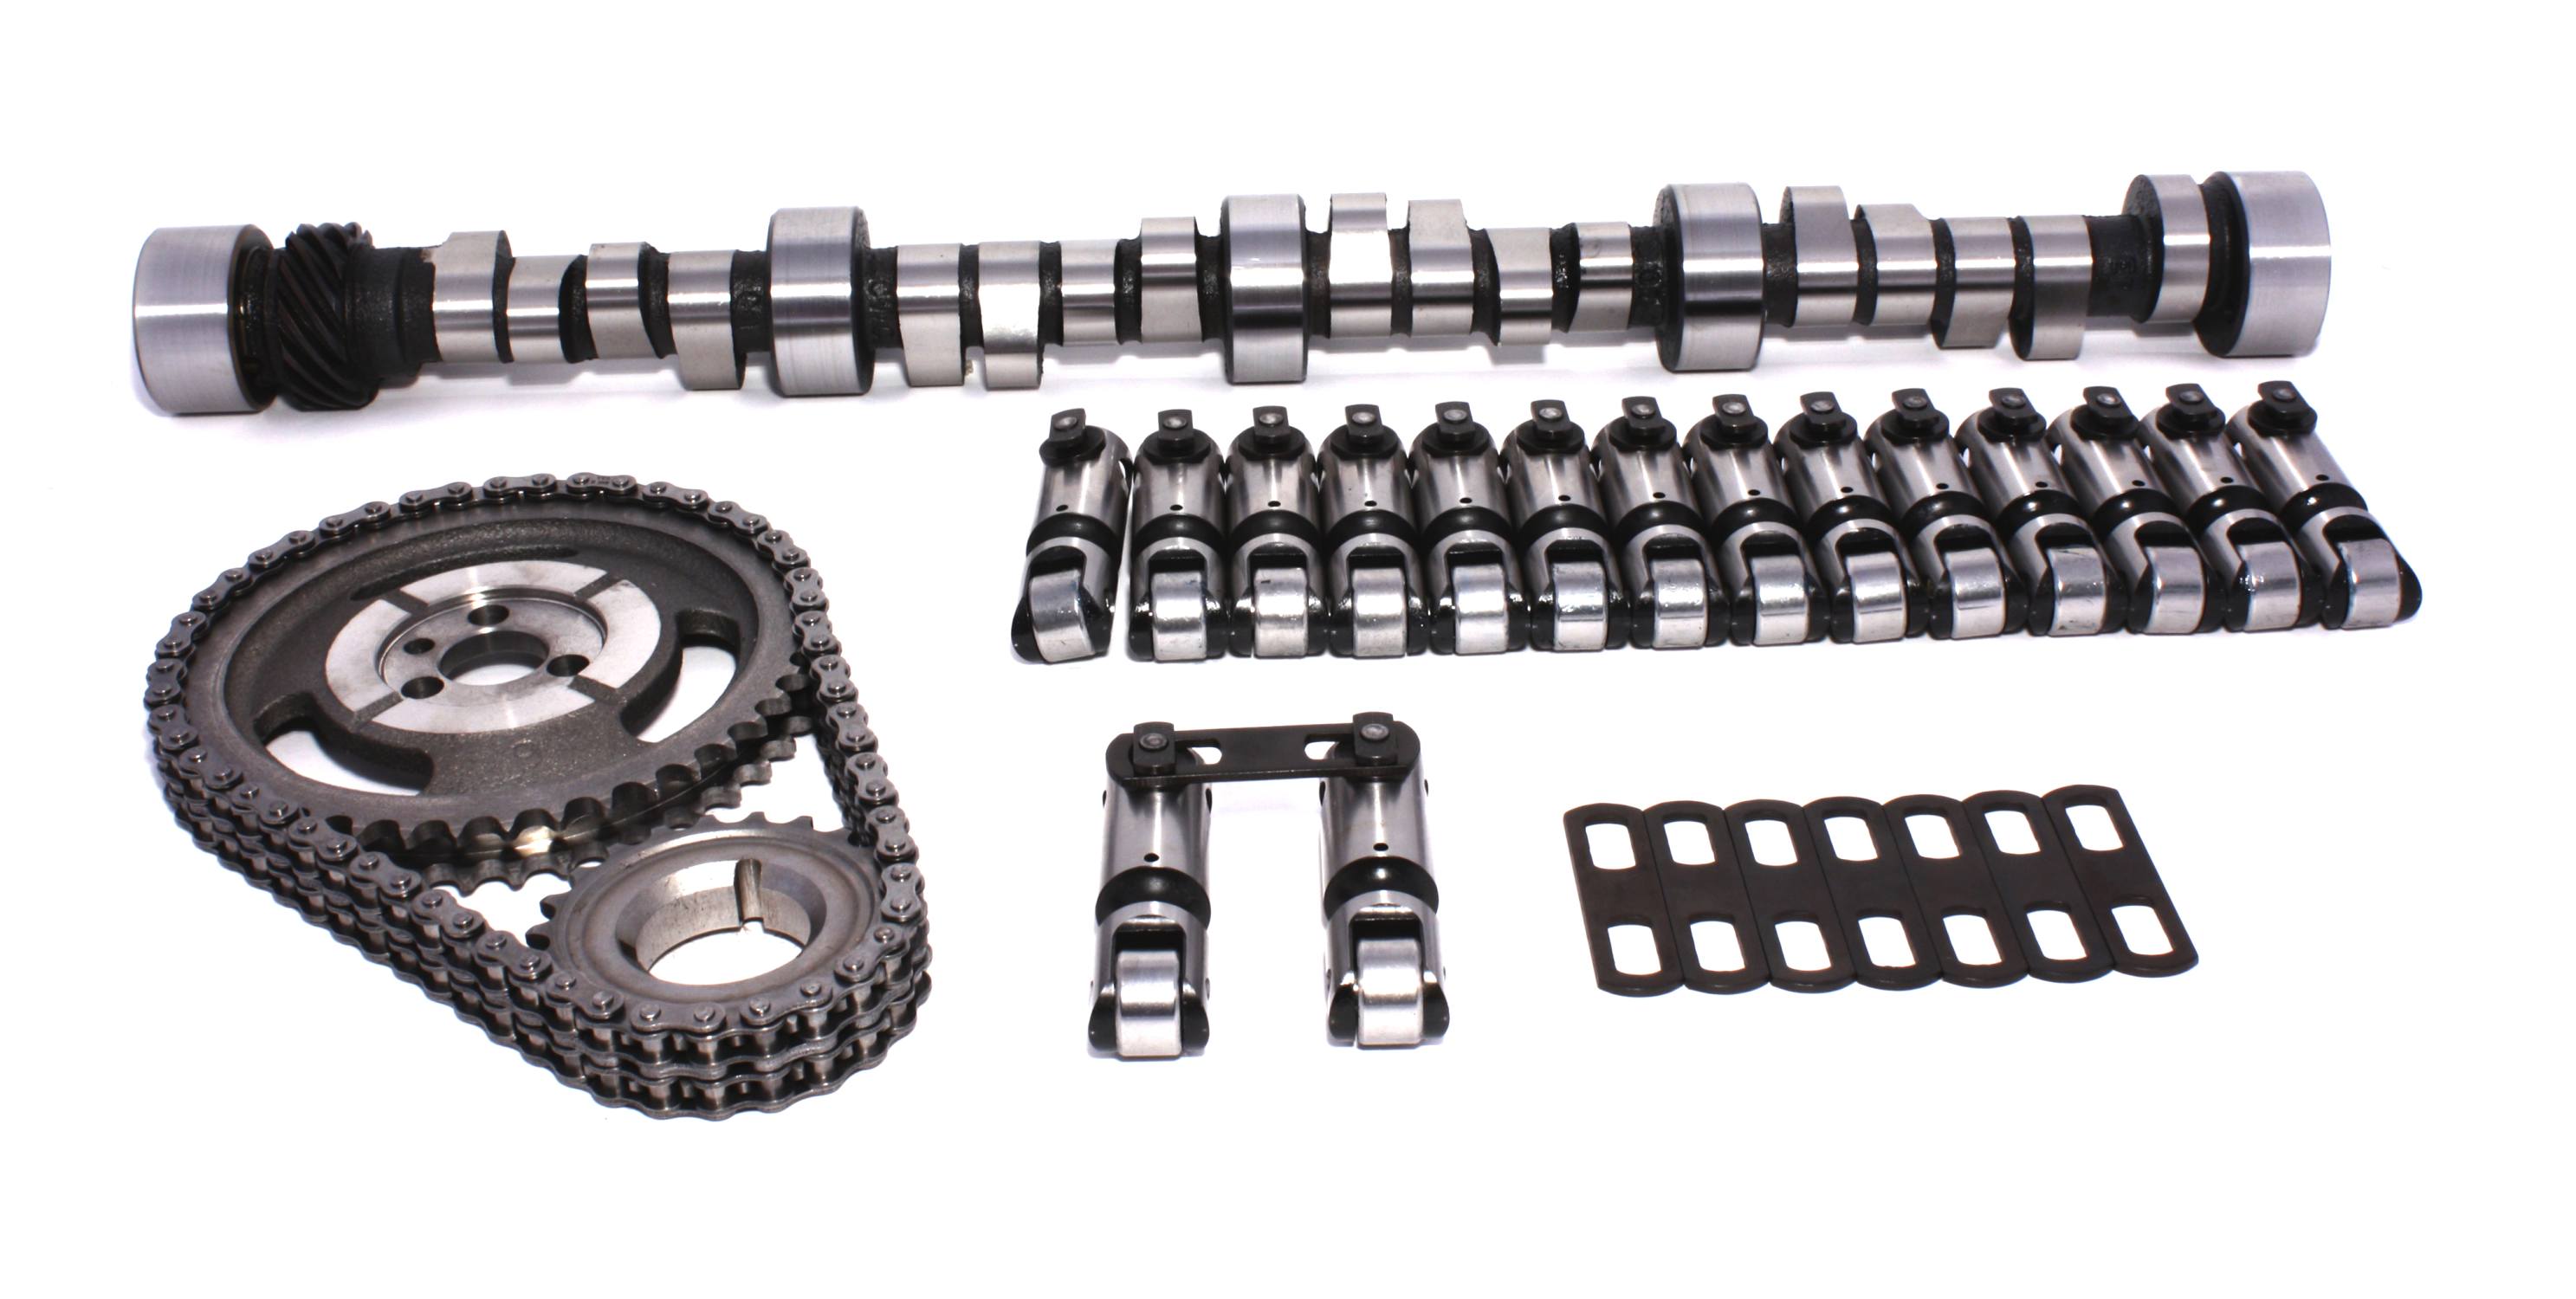 Endure-X Solid Roller Lifter Set for Chevrolet Small Block - SK12-700-8